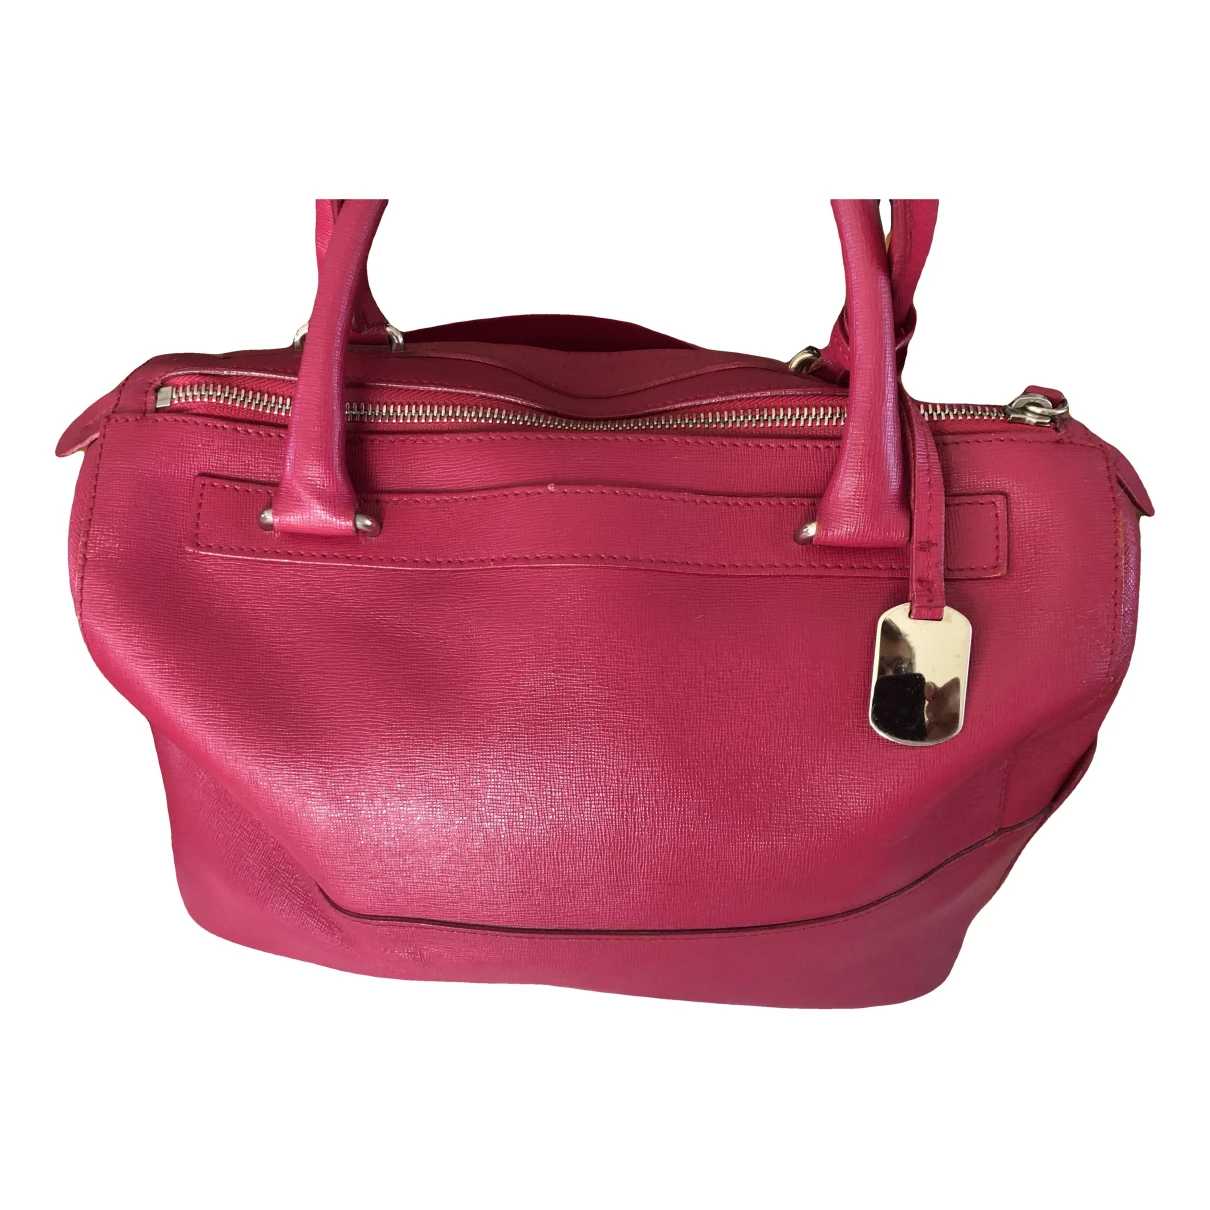 Pre-owned Furla Candy Bag Leather Handbag In Pink